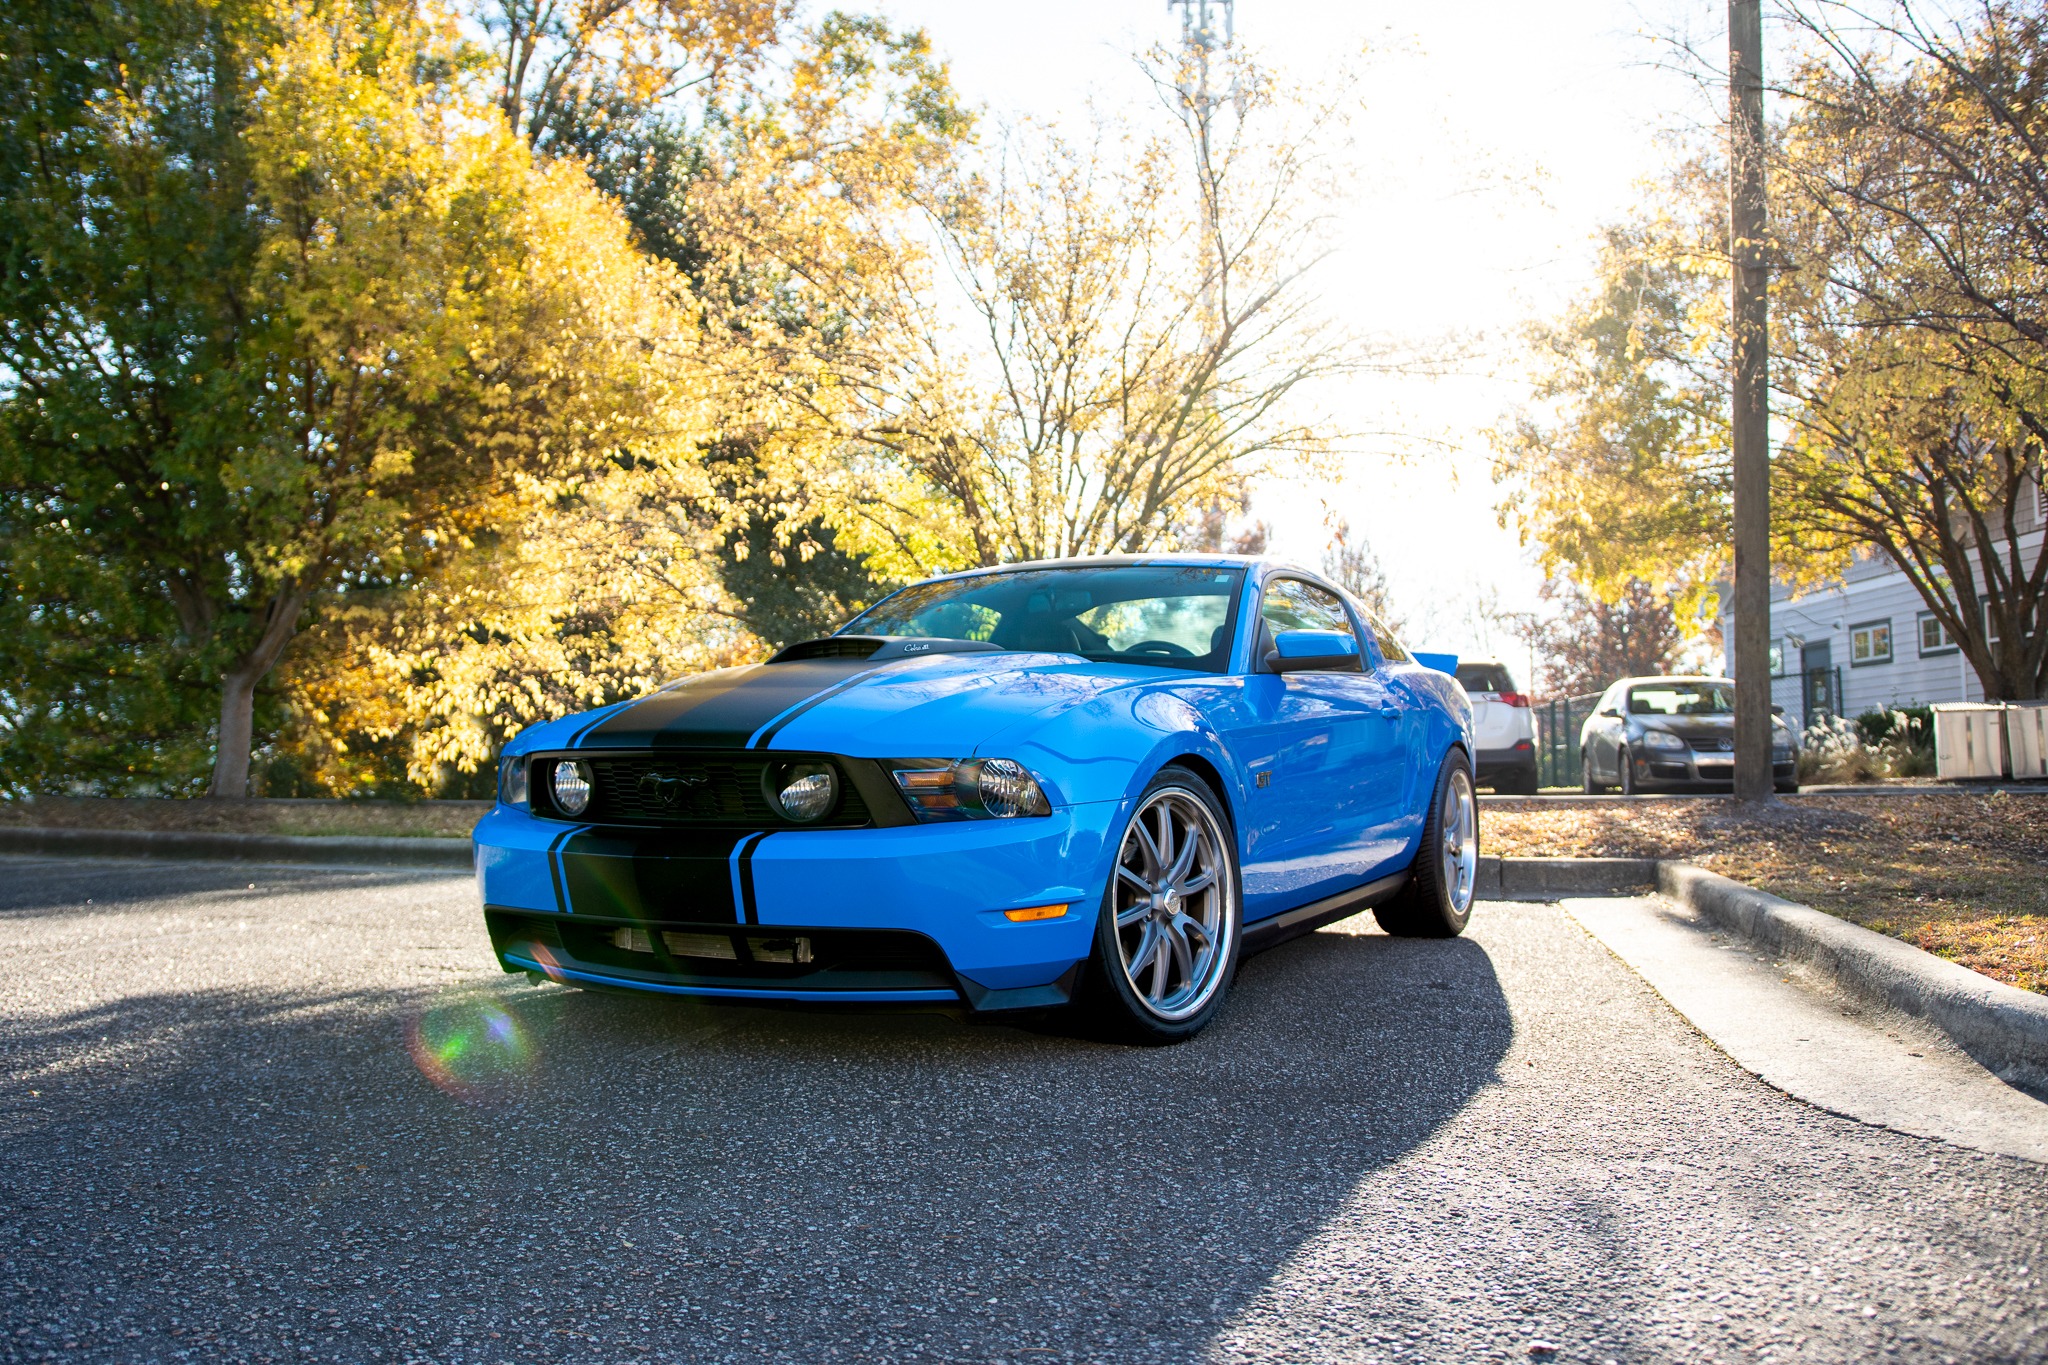 Project Car Updates: 2011 Mustang GT, Project Grabbr